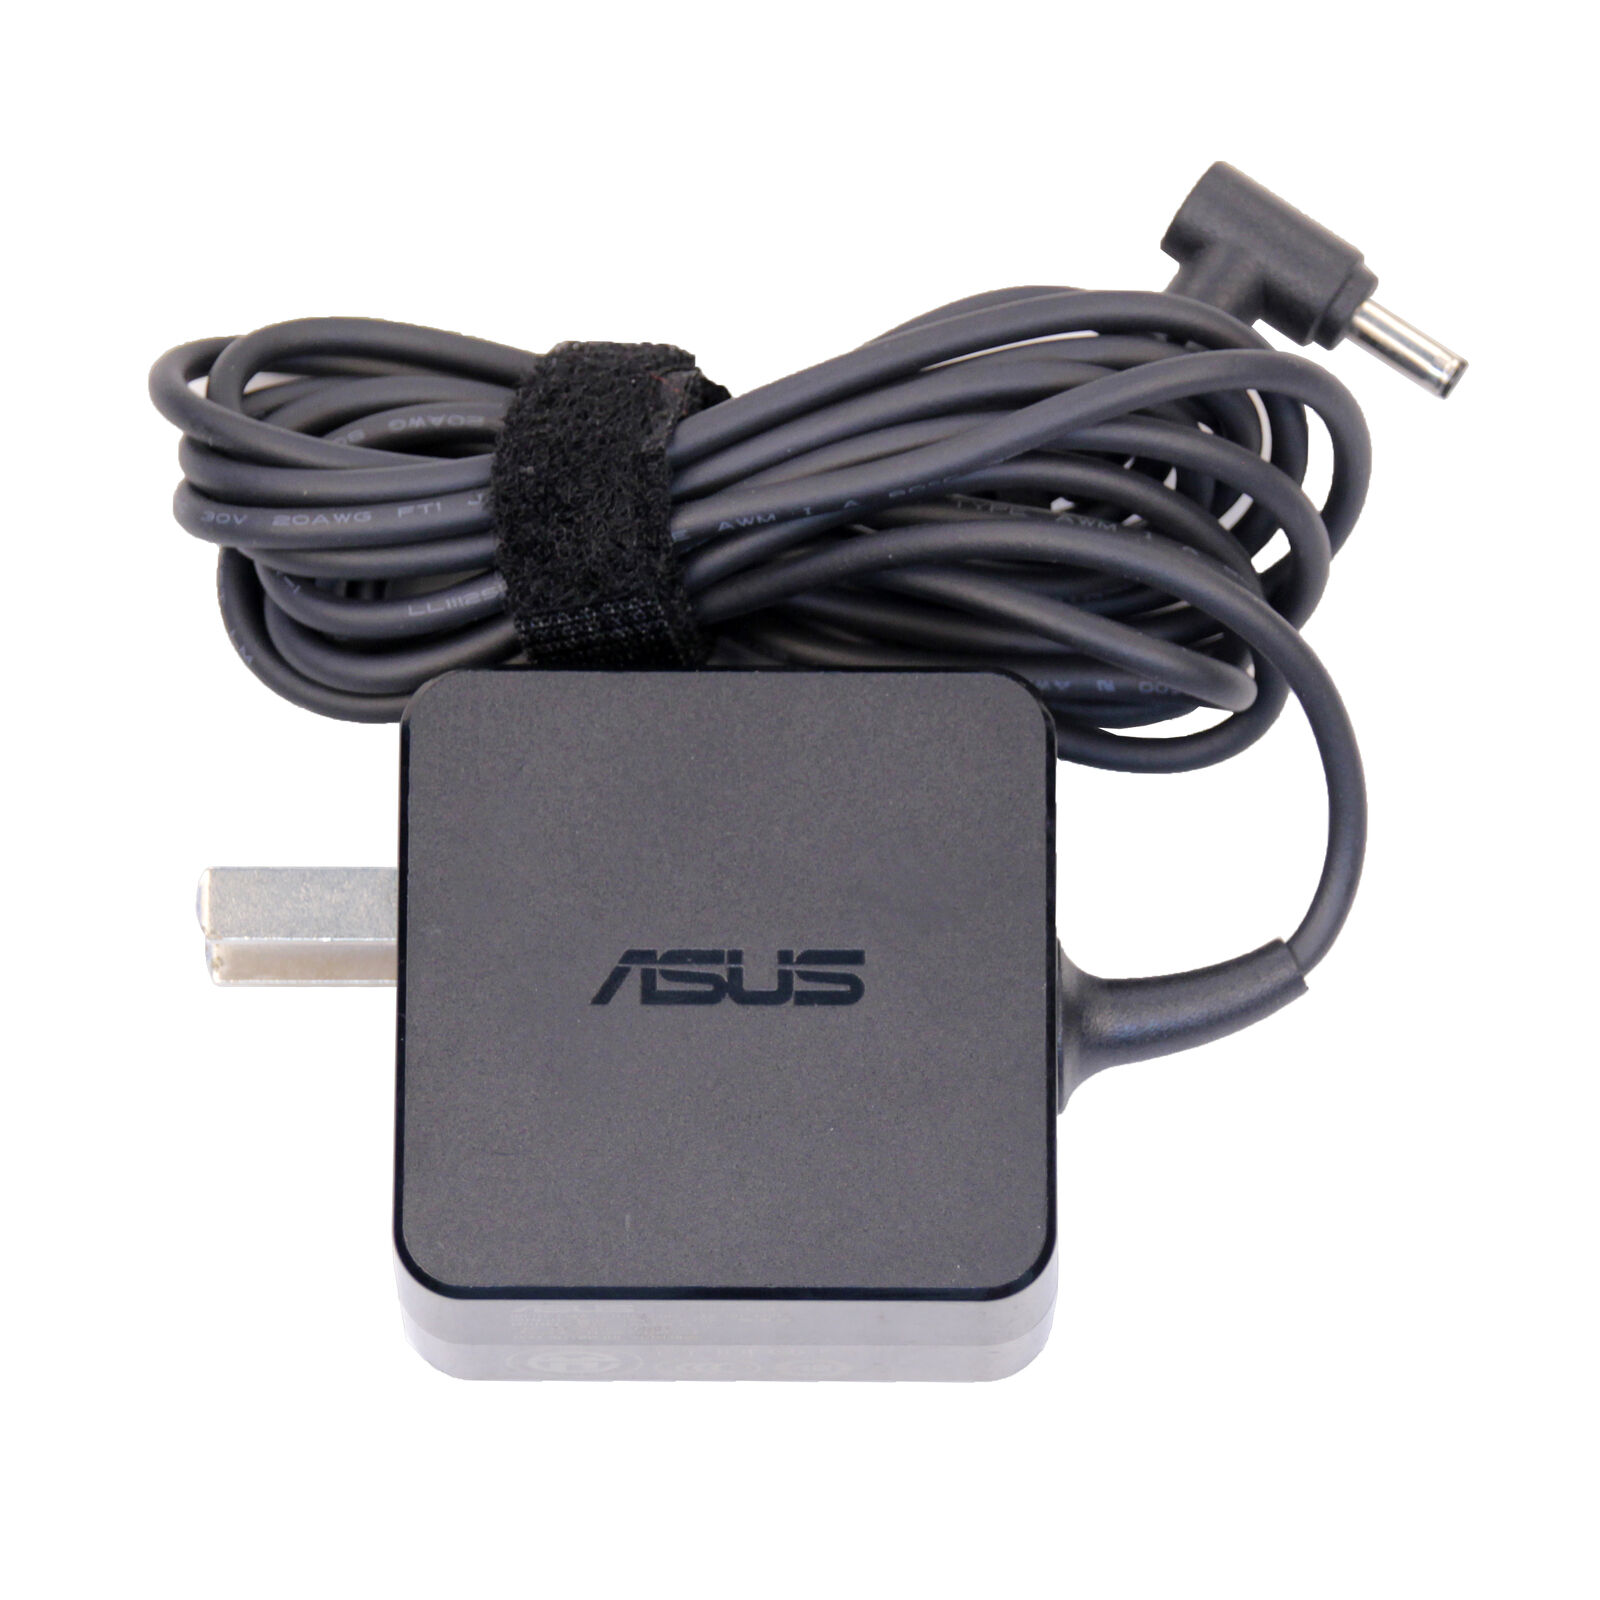 ASUS AD2088320 19V 1.75A 33W Genuine Original AC Power Adapter Charger